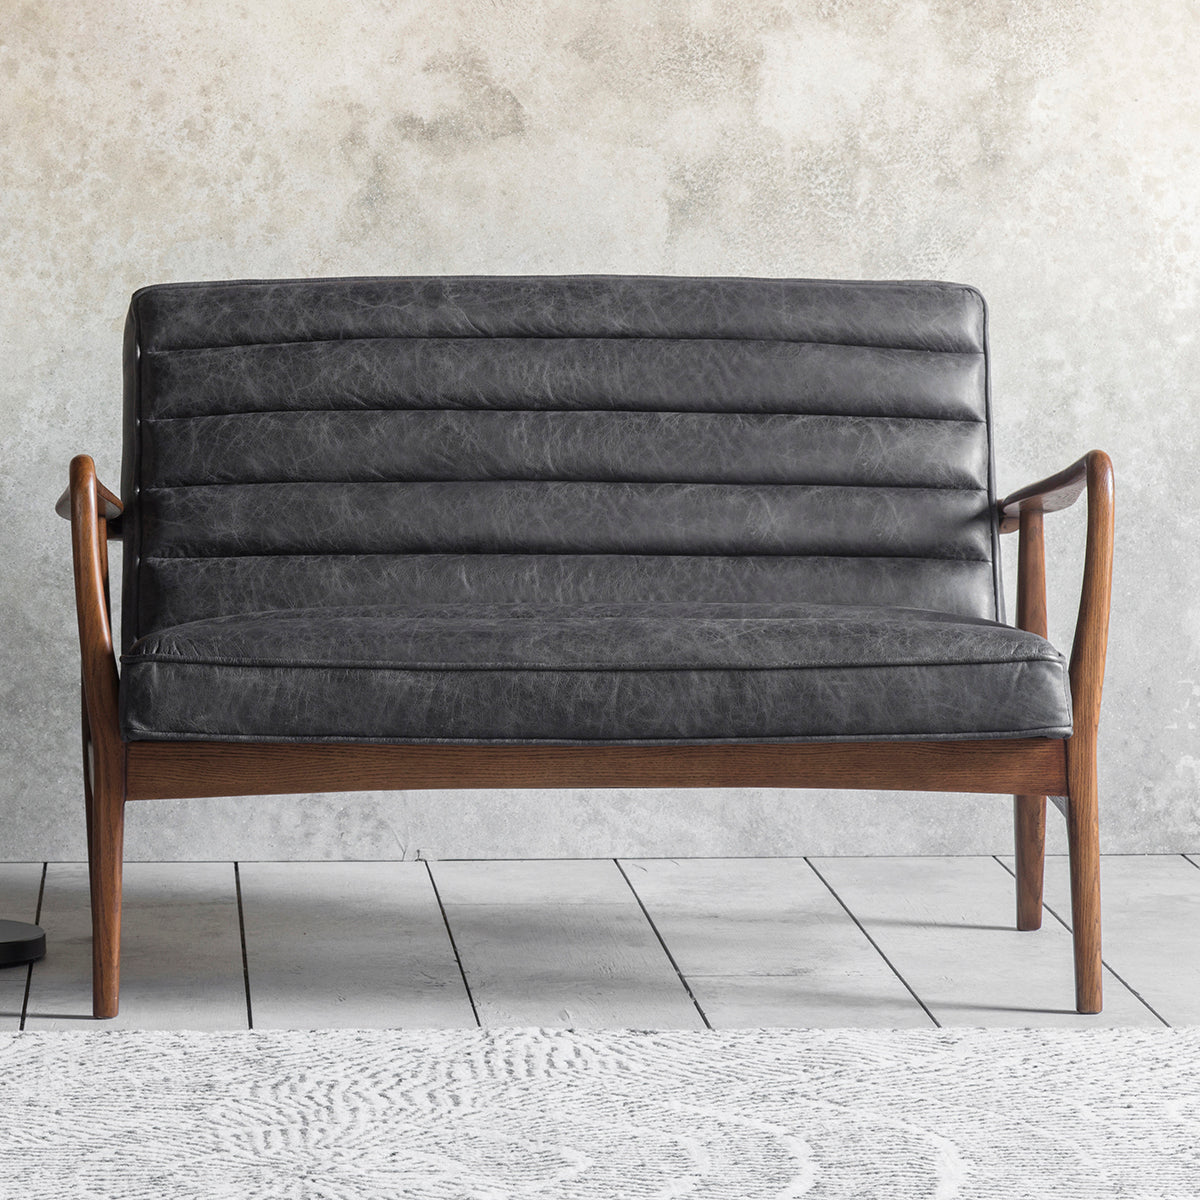 A Datsun 2 Seater Sofa Antique Ebony for home furniture and interior decor from Kikiathome.co.uk in front of a wall.